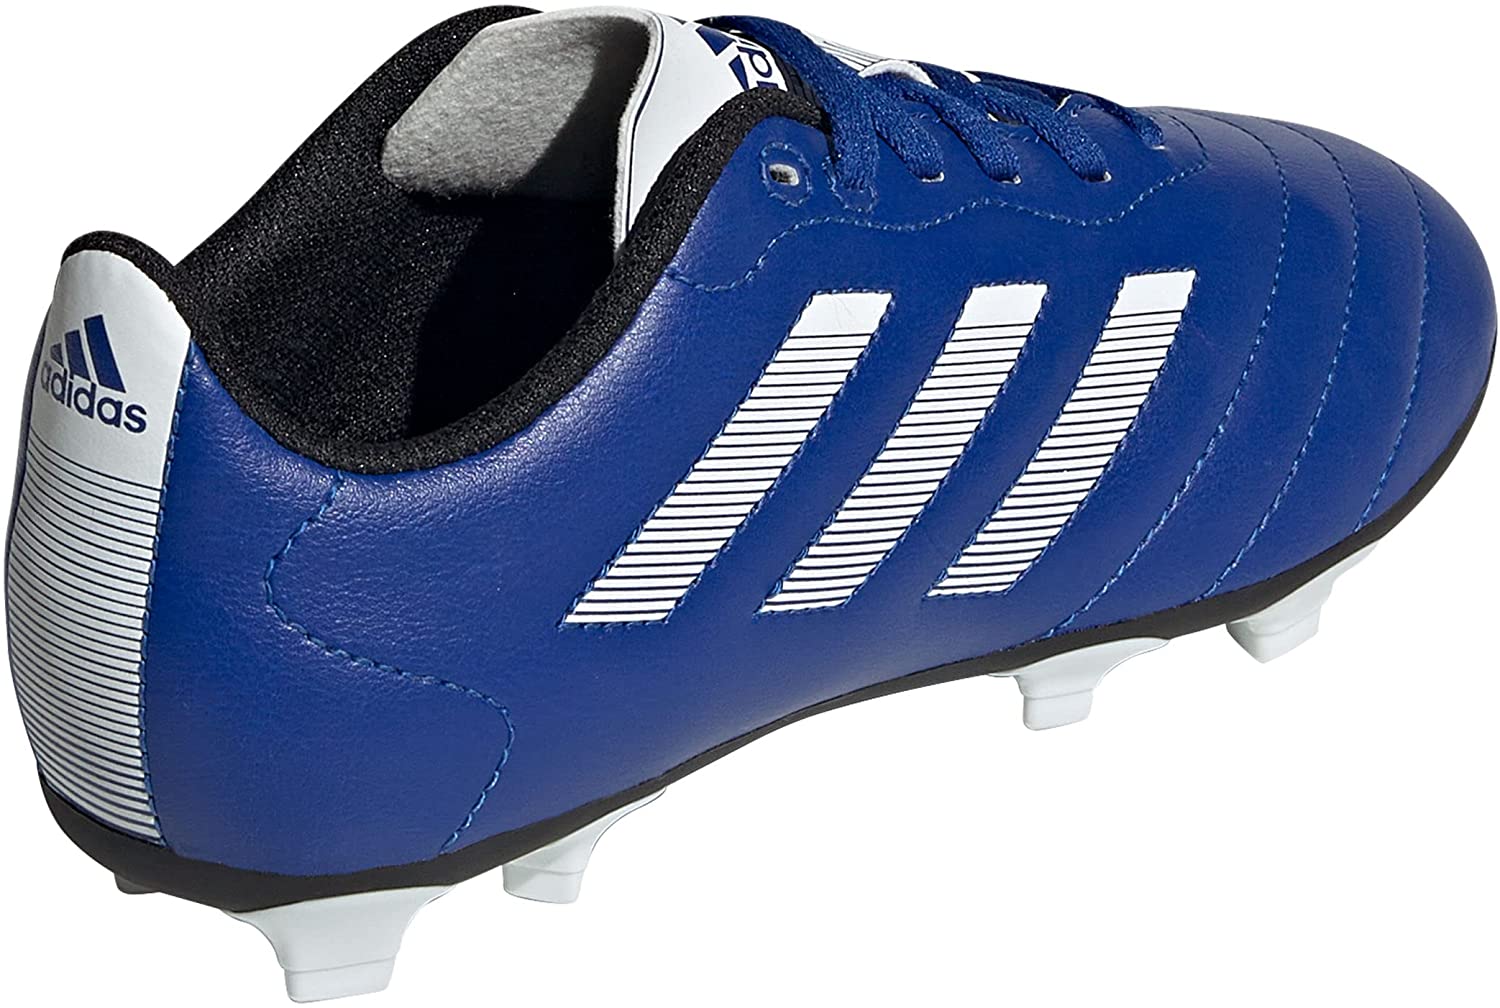 adidas Kids Unisex Soccer Goletto VIII Firm Ground Cleats - Royal Blue / Cloud White / Core Black - 2.5K